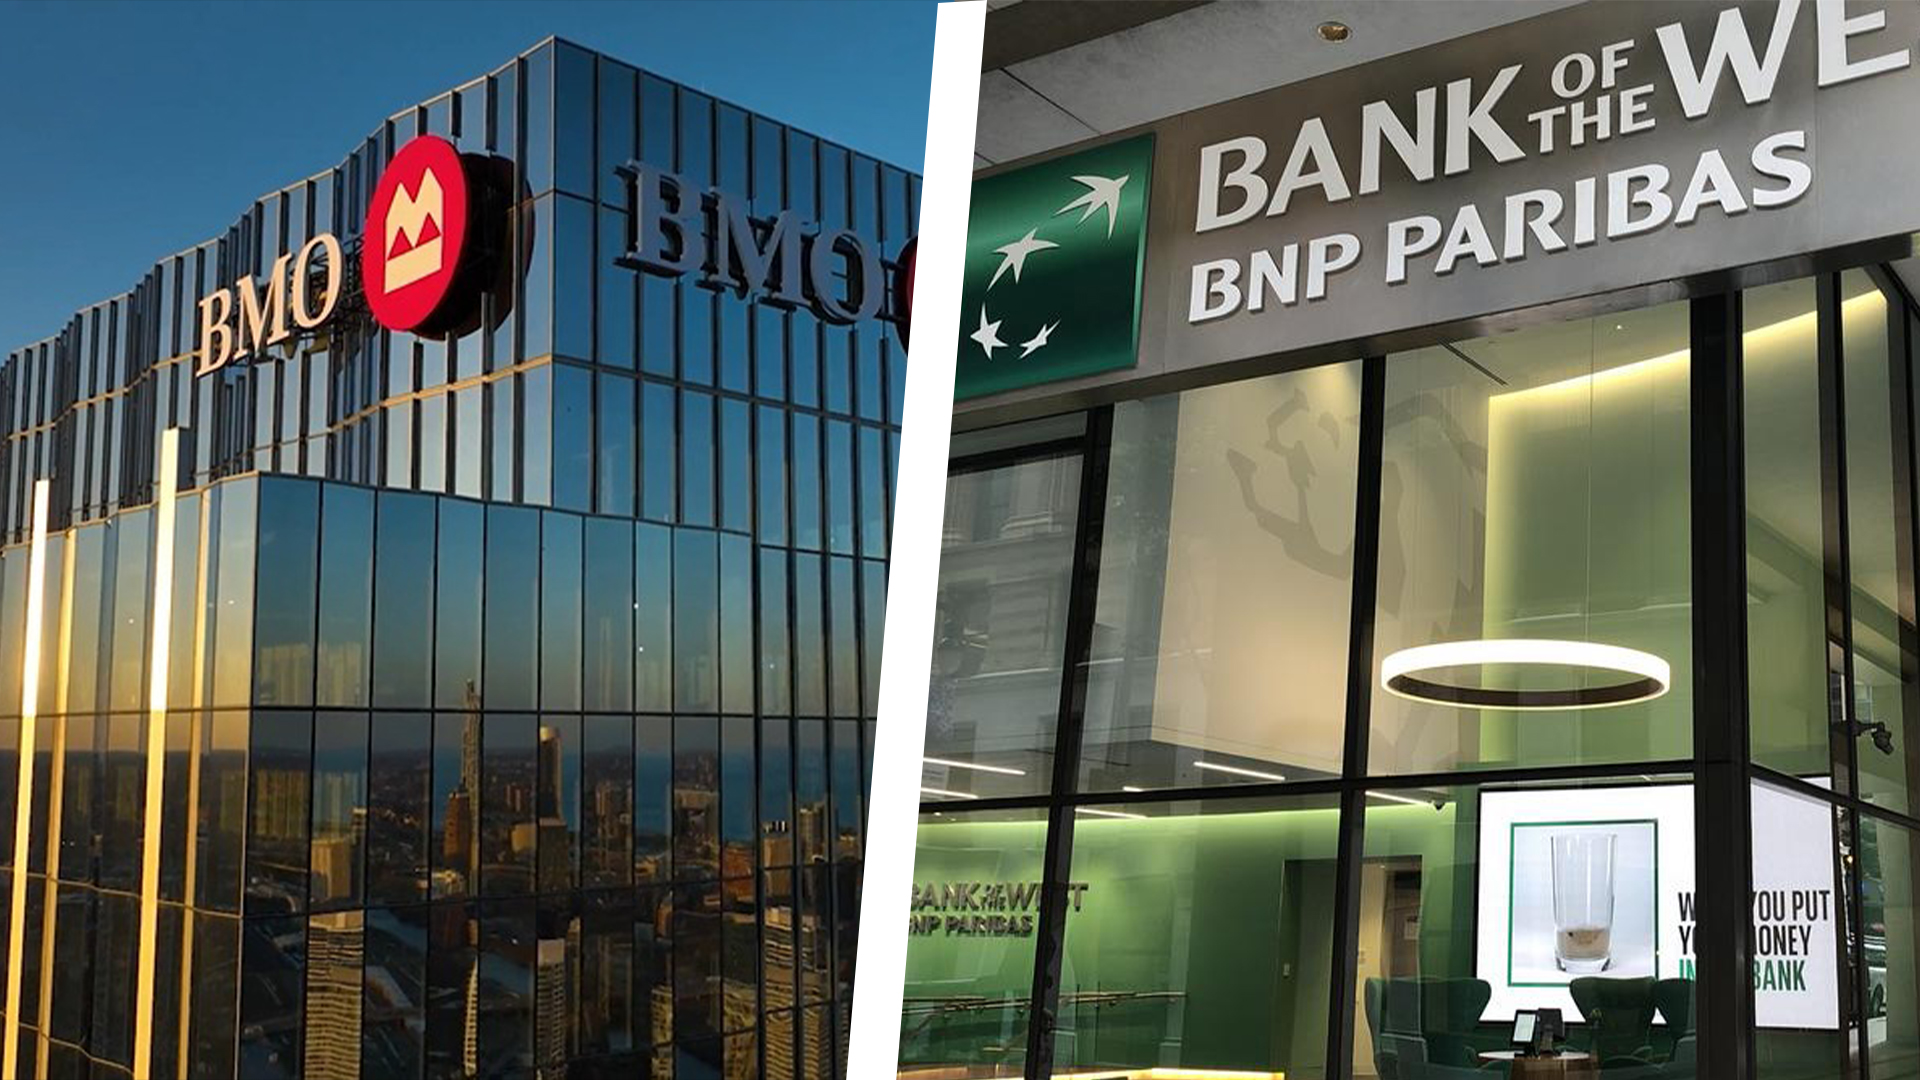 BMO Announces Completion of Bank of the West Acquisition